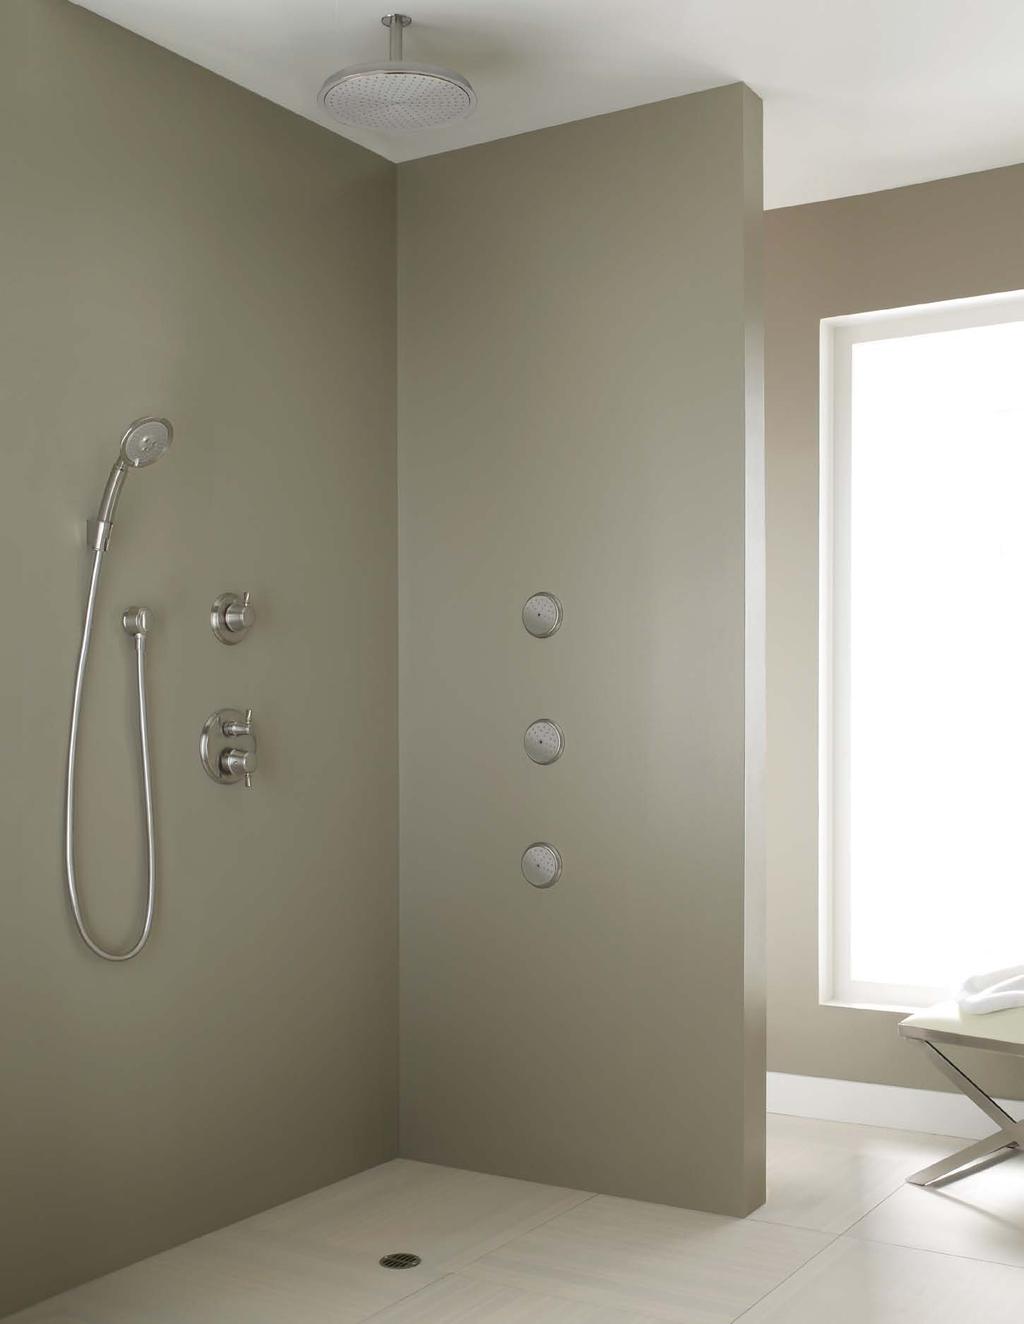 Combined with a new thermostatic trim delivering up to 8 GPM ambitious shower concepts are possible with Hansgrohe.